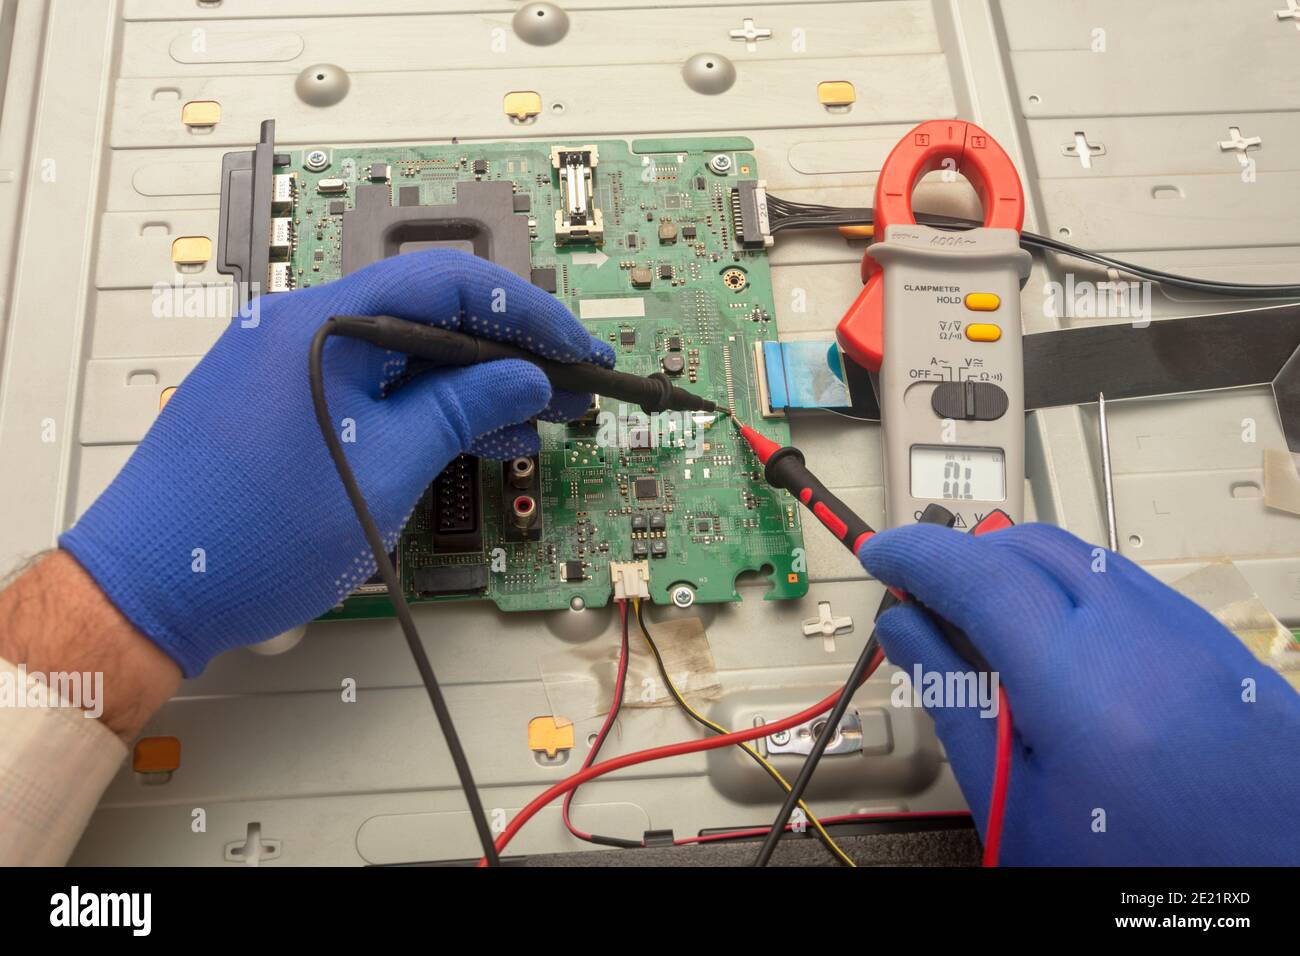 Volgograd, Russia - September, 2020: Diagnostics of printed circuit board TV. Hands hold the resistance test lead. Selective focus. Stock Photo